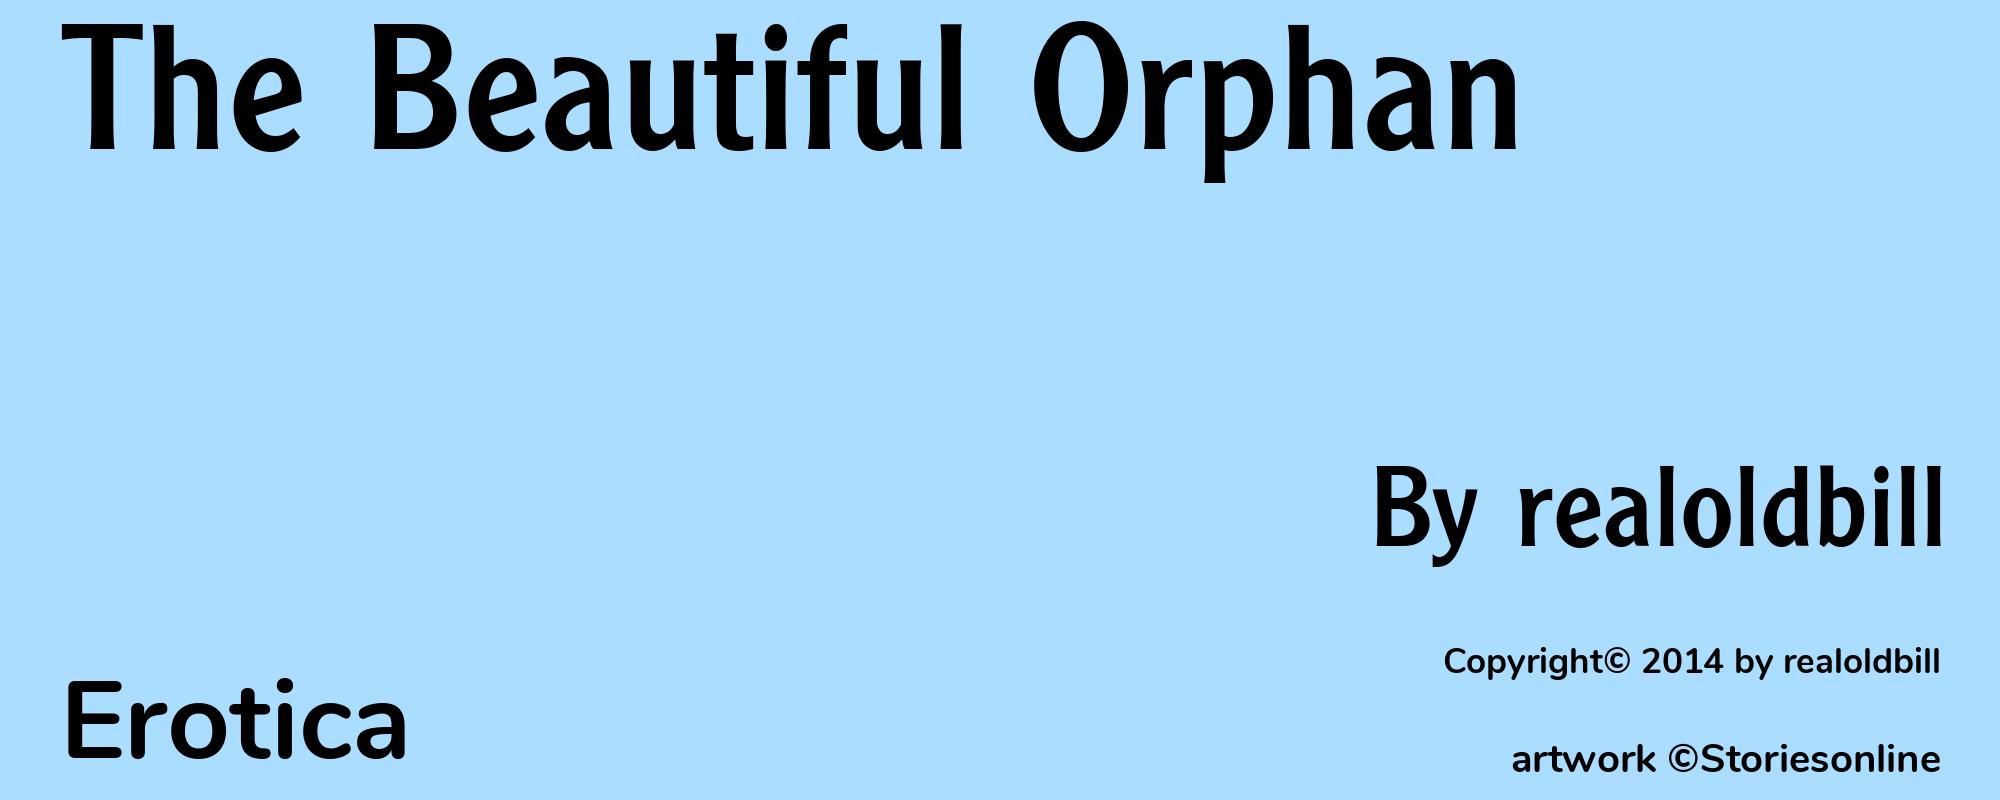 The Beautiful Orphan - Cover